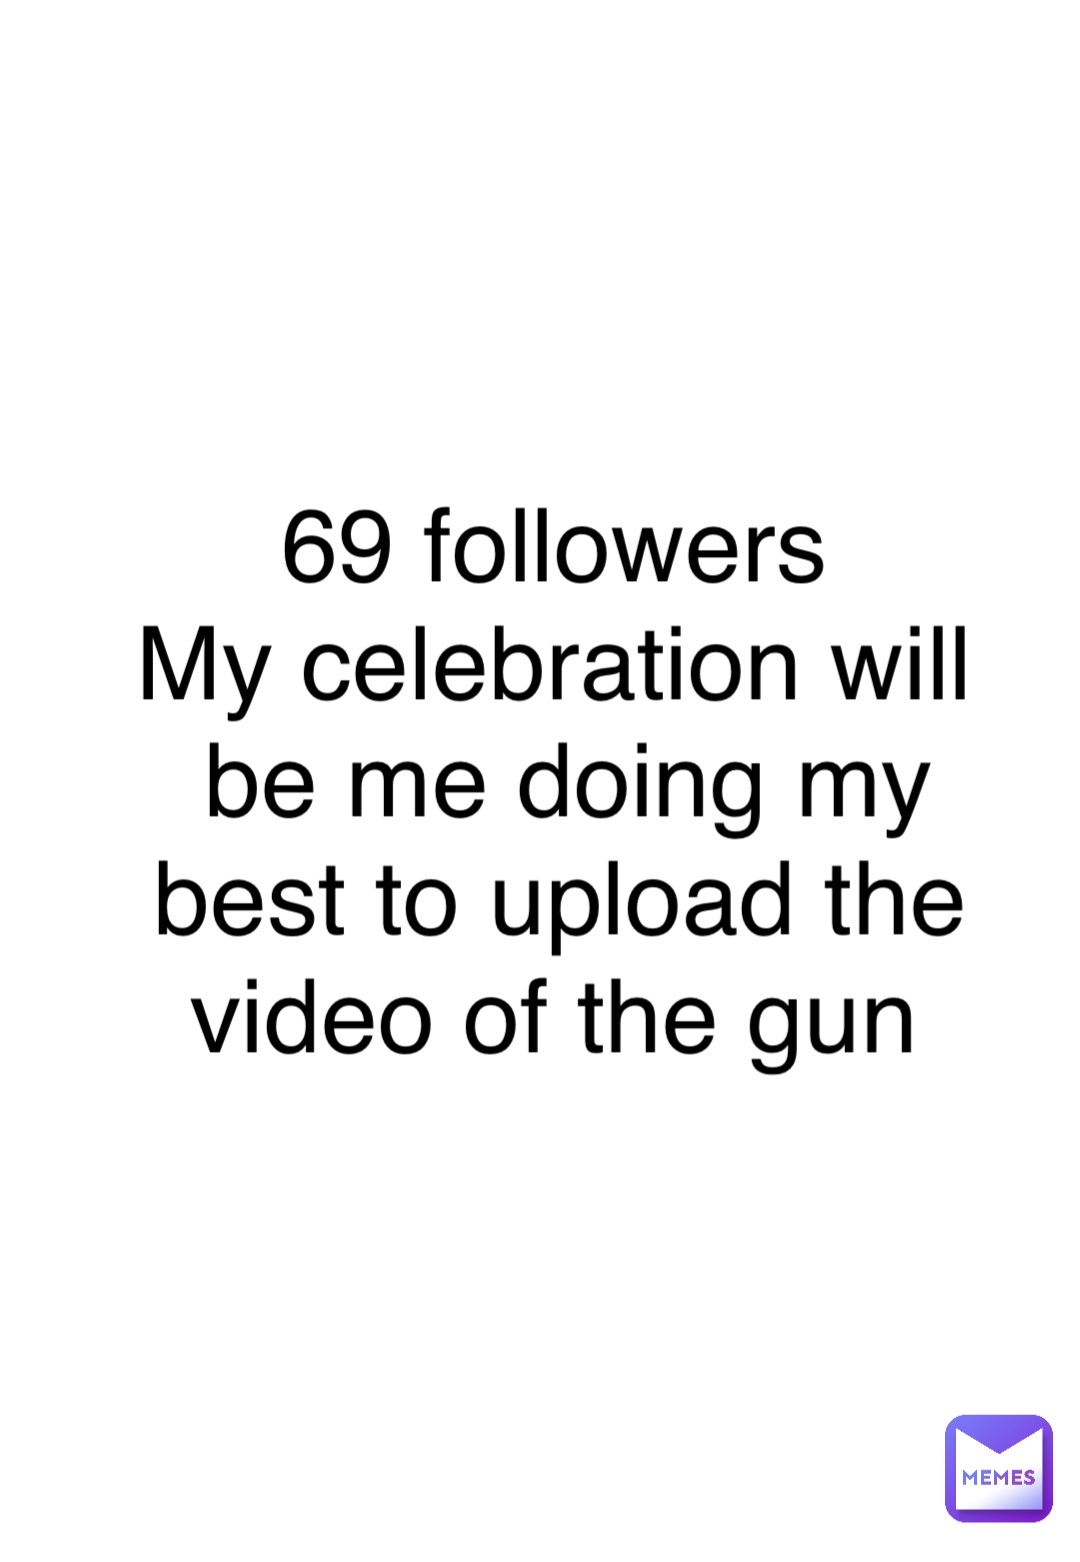 69 followers
My celebration will be me doing my best to upload the video of the gun